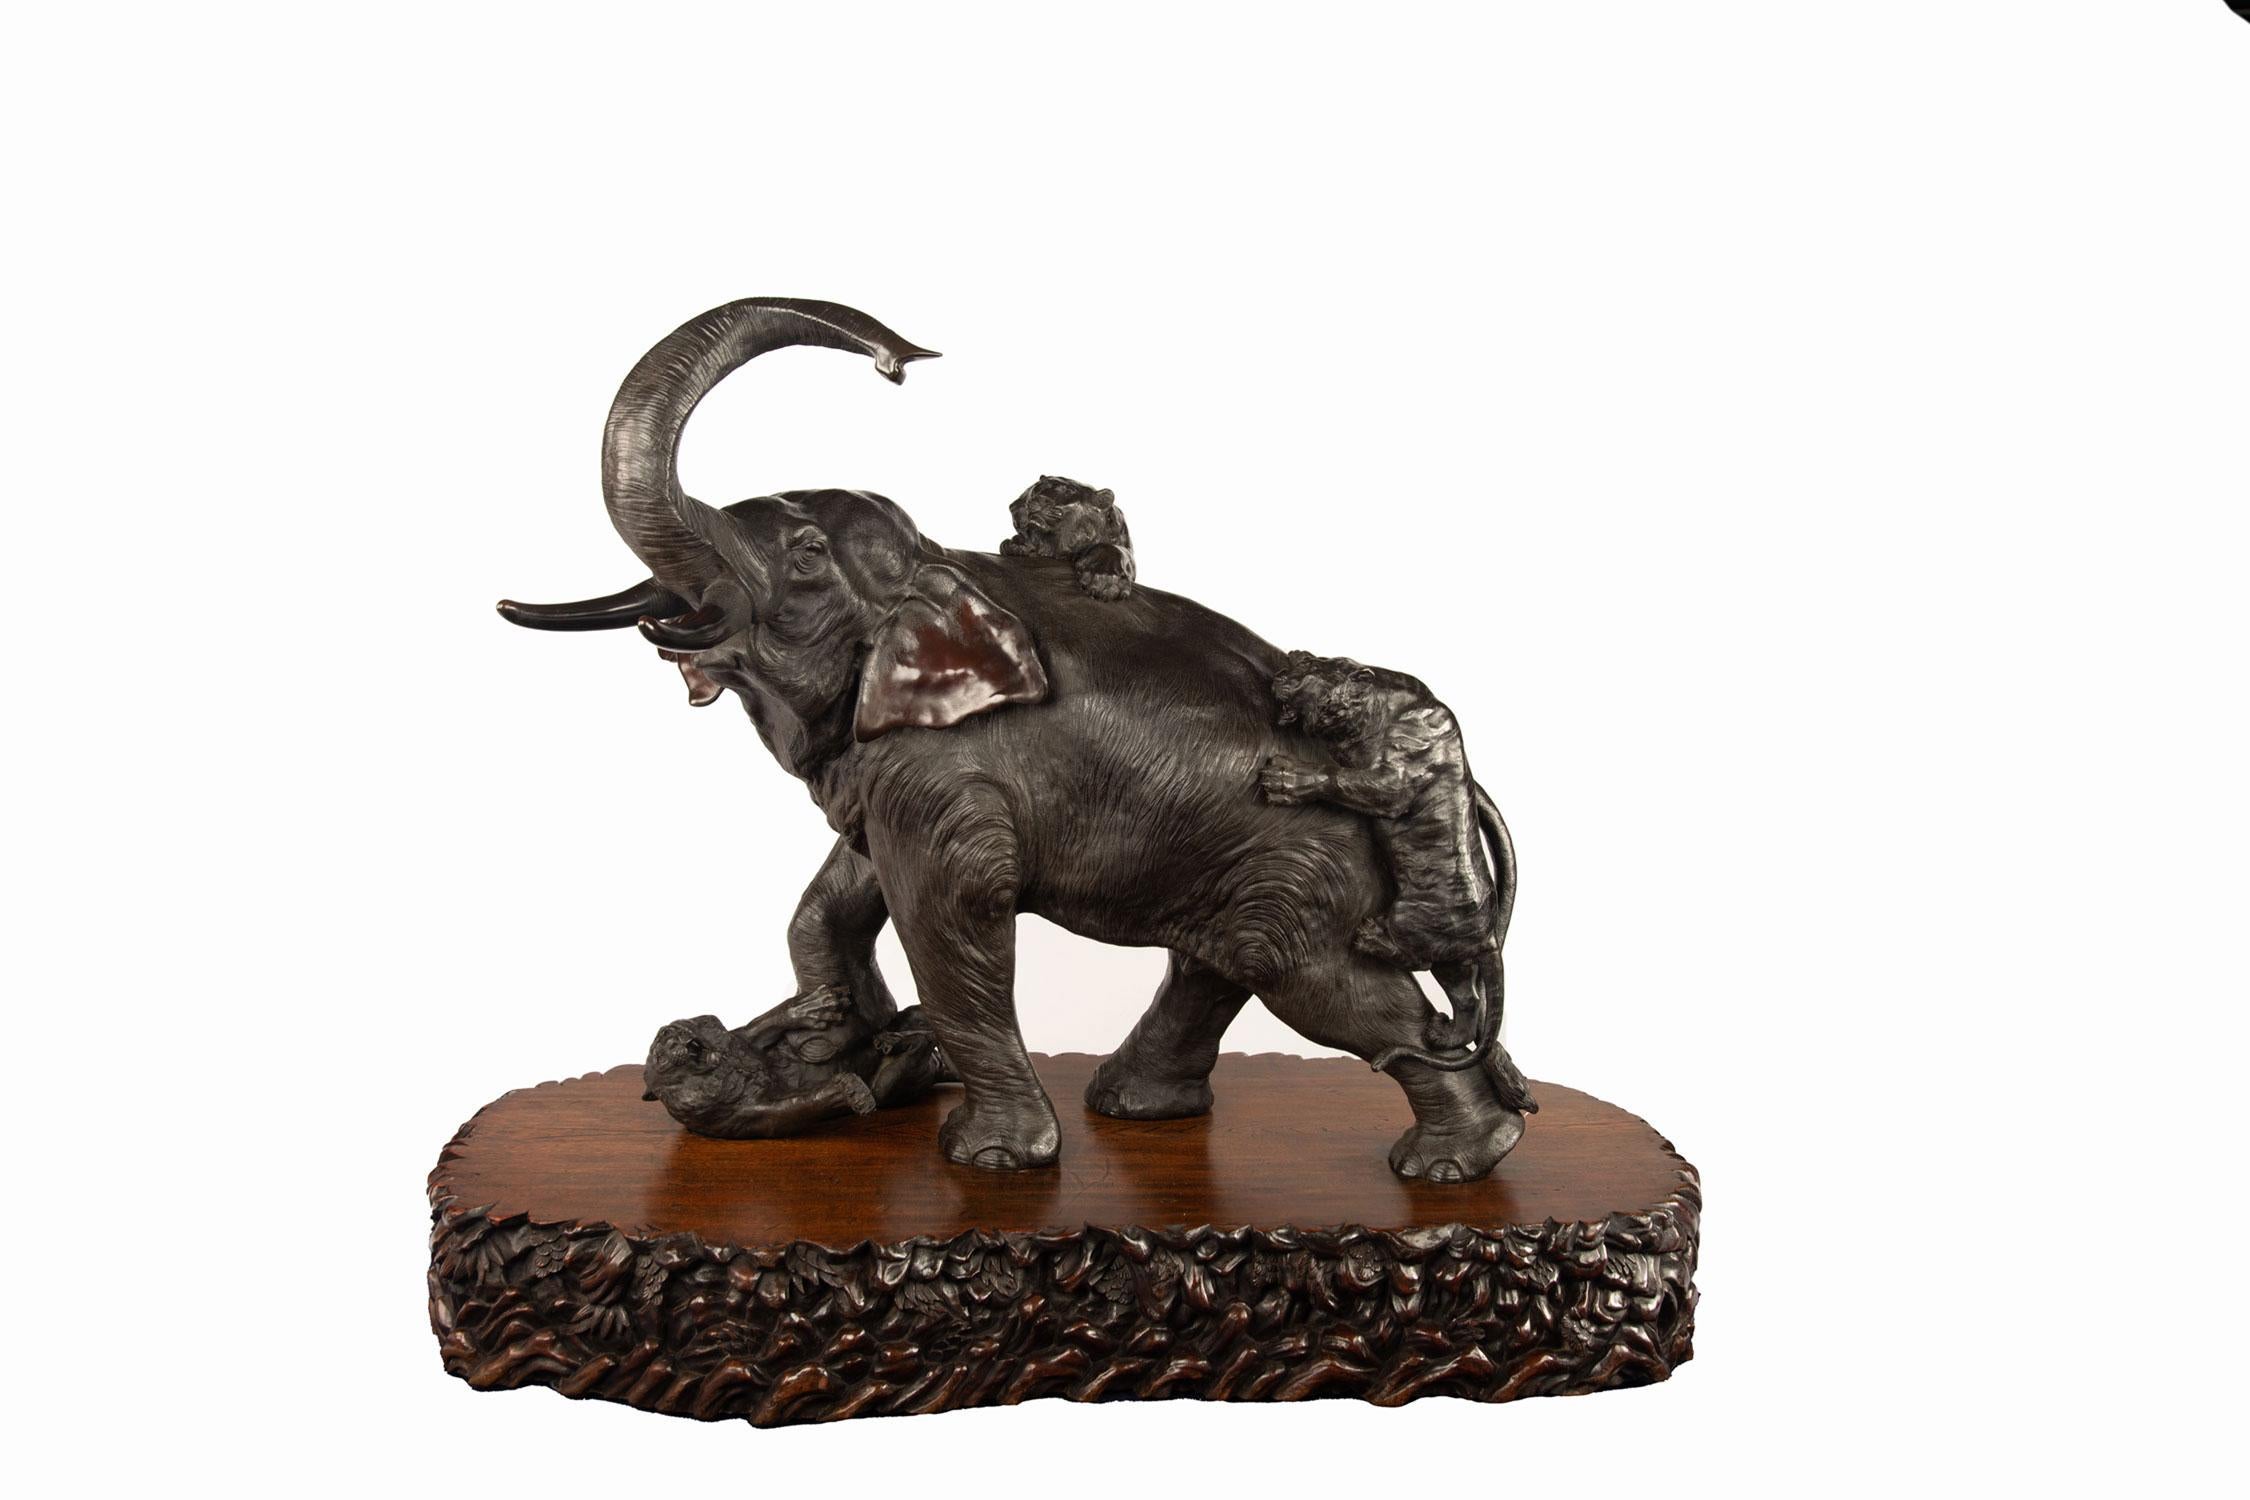 As part of our Japanese works of art collection we are delighted to offer this magnificent huge scale Meiji Period 1868-1912 bronze elephant and tiger group by the leading 19th century metalworker Sano Takachika. This monumental group has certainly